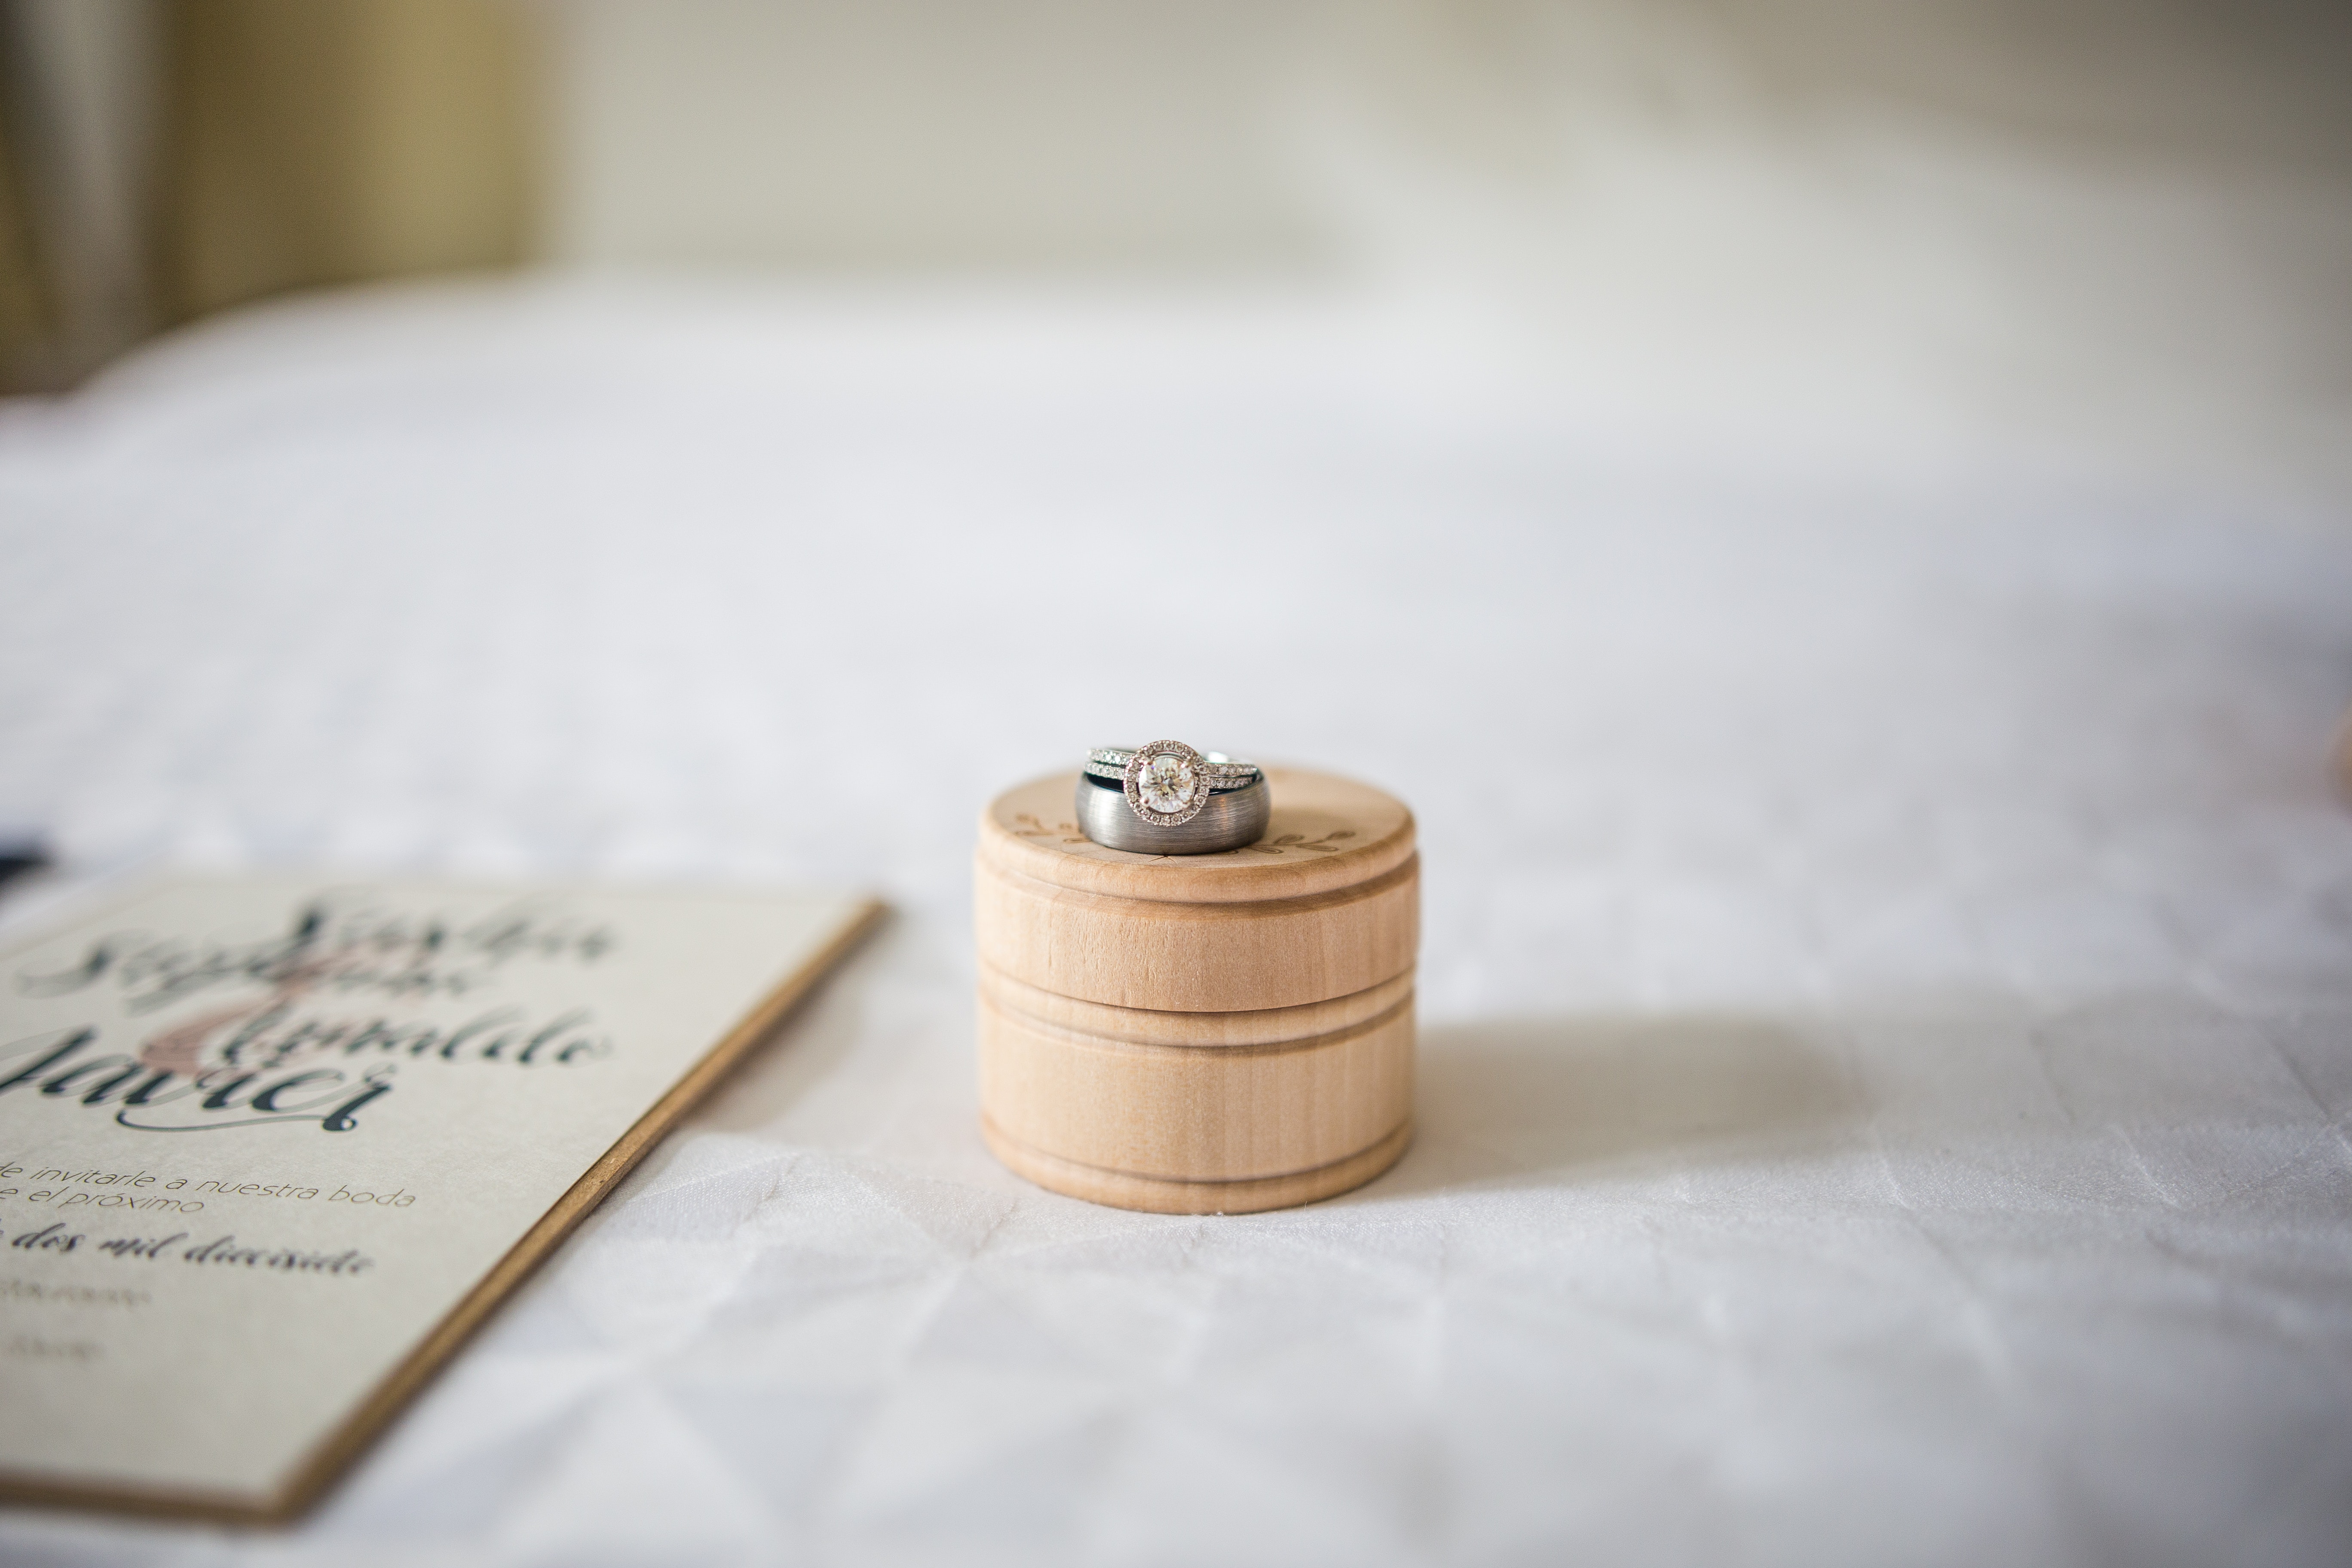 wedding rings on top of a white cloth table with a wedding invitation next to them